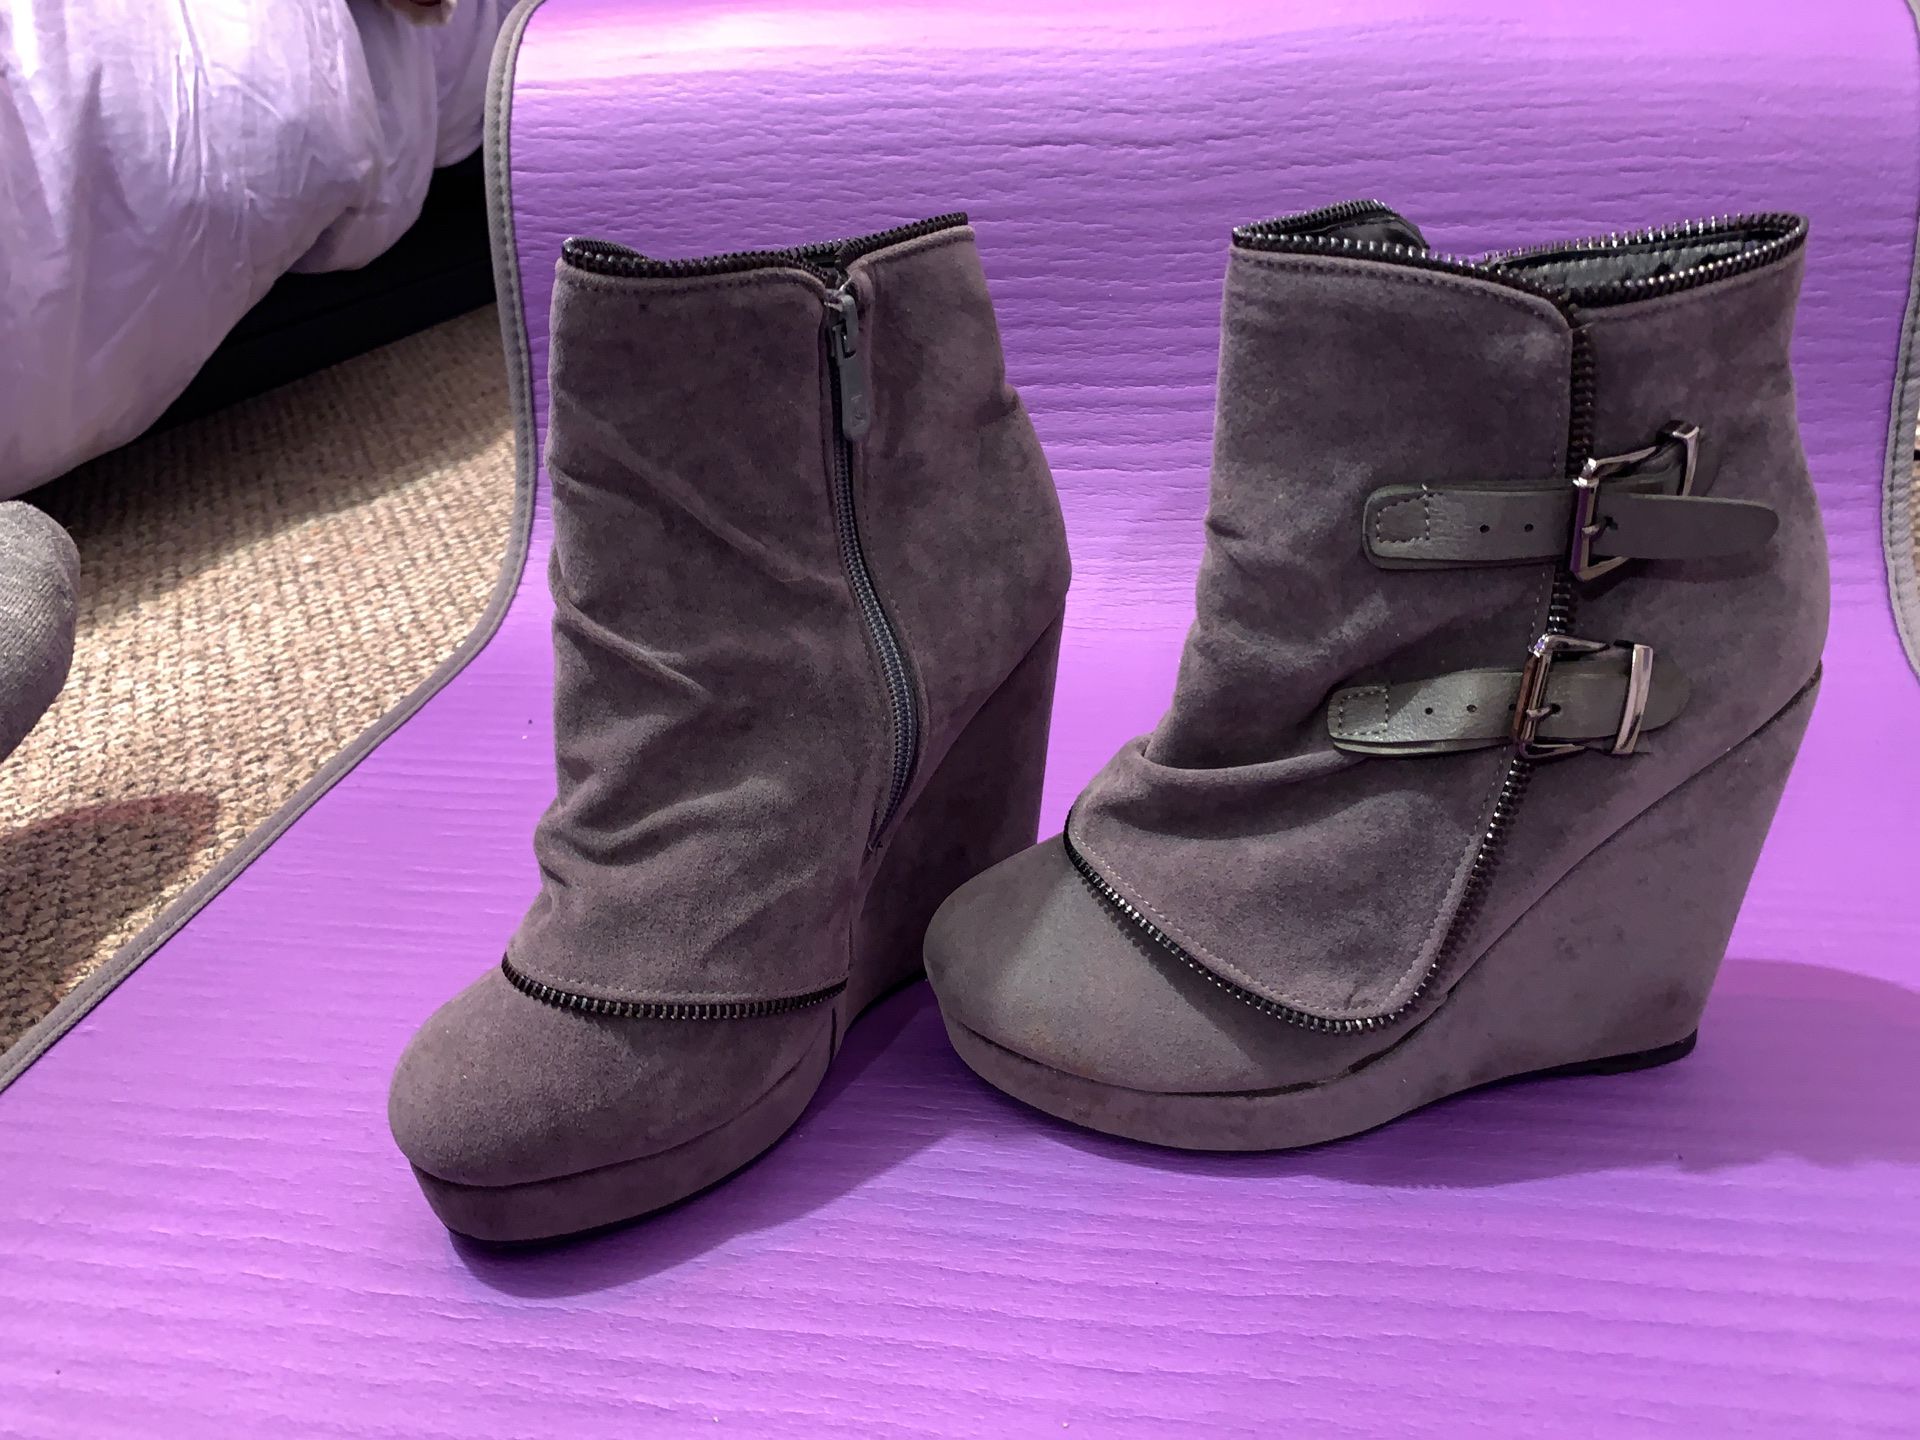 Lightweight Suede wedge booties / boots! Fall vibes autumn feels